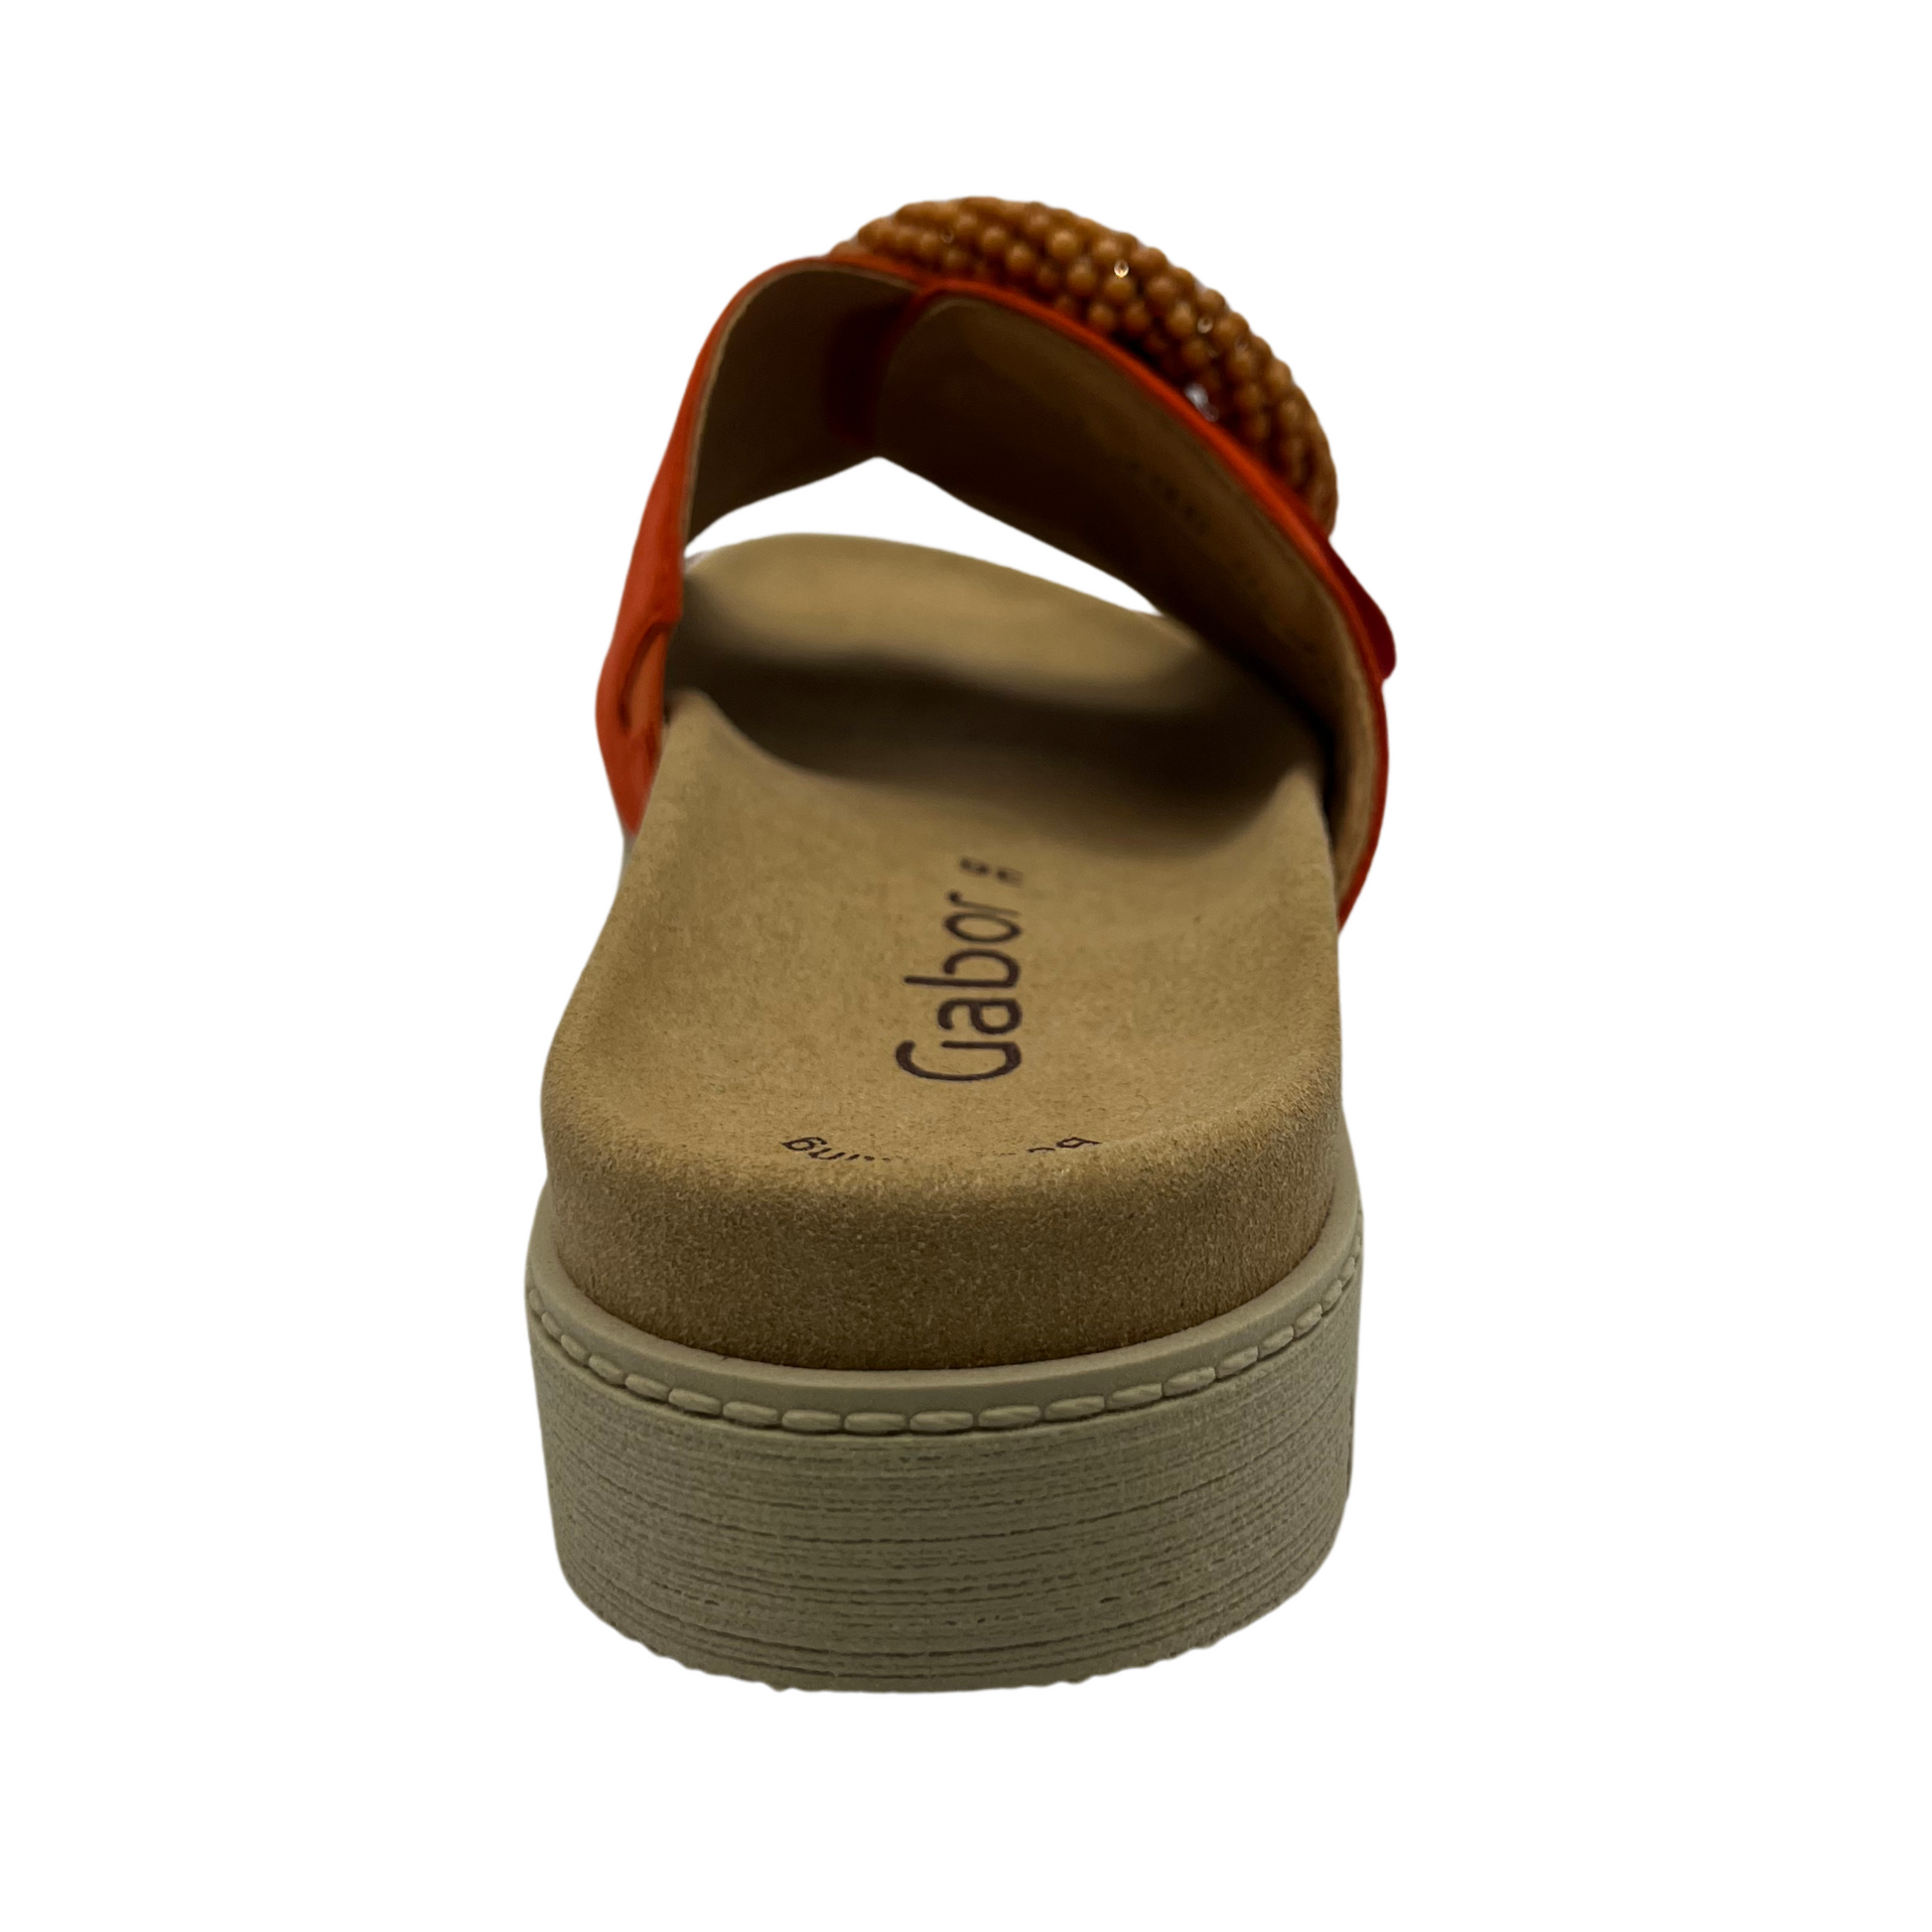 Back view of orange suede slide with large buckle detail and anatomical footbed